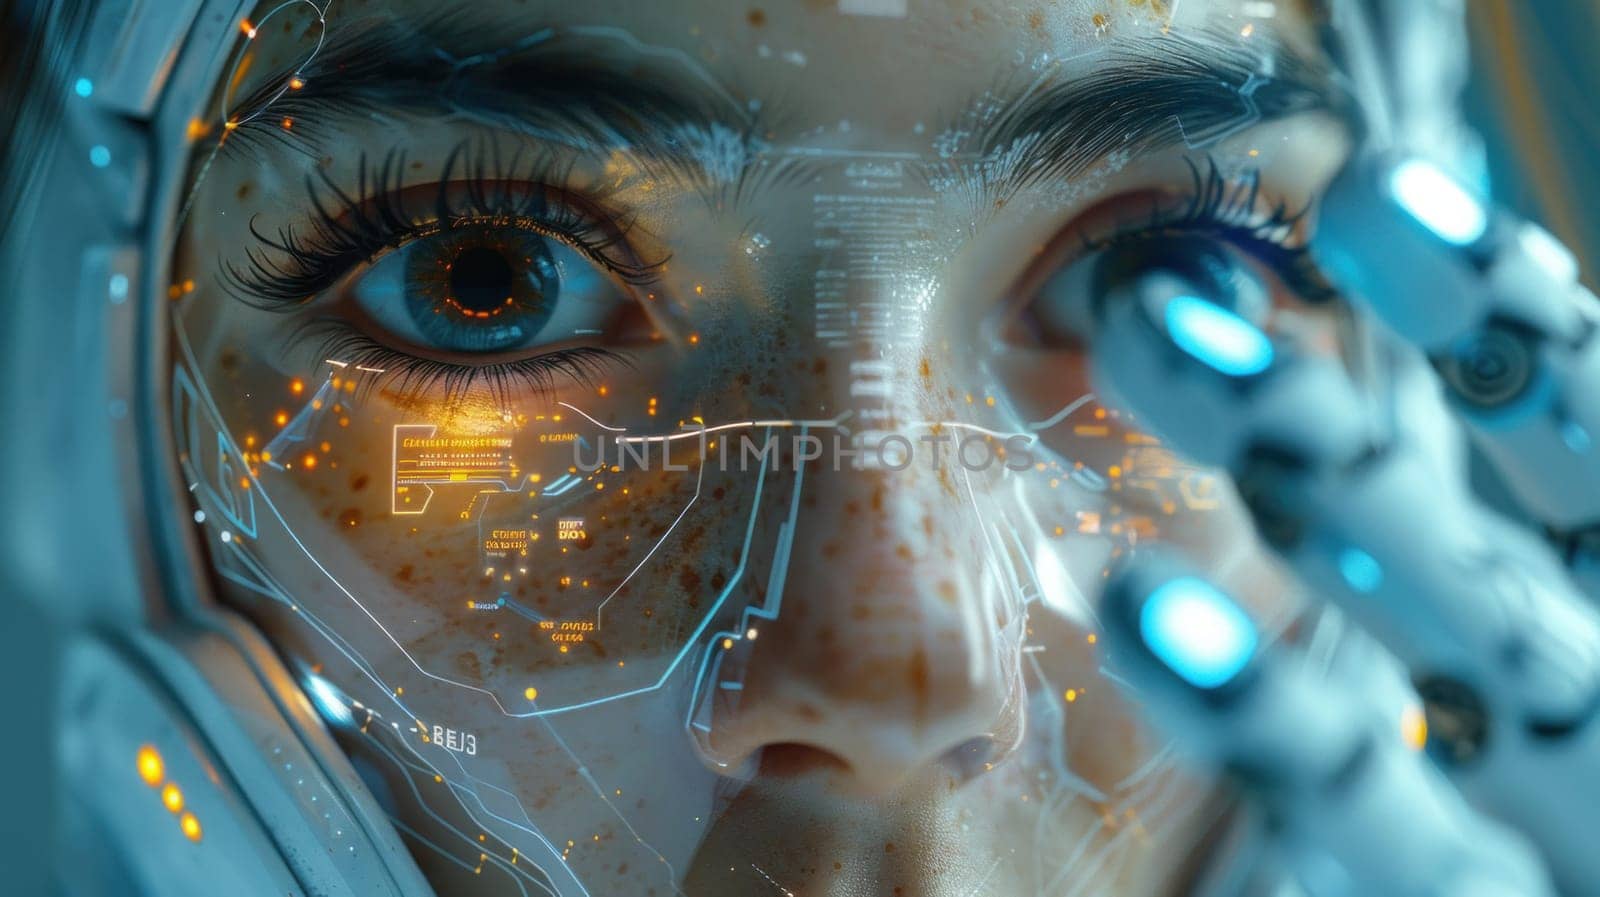 A close-up of a womans face showing futuristic blue eyes, reflecting advancements in technology and biometrics.